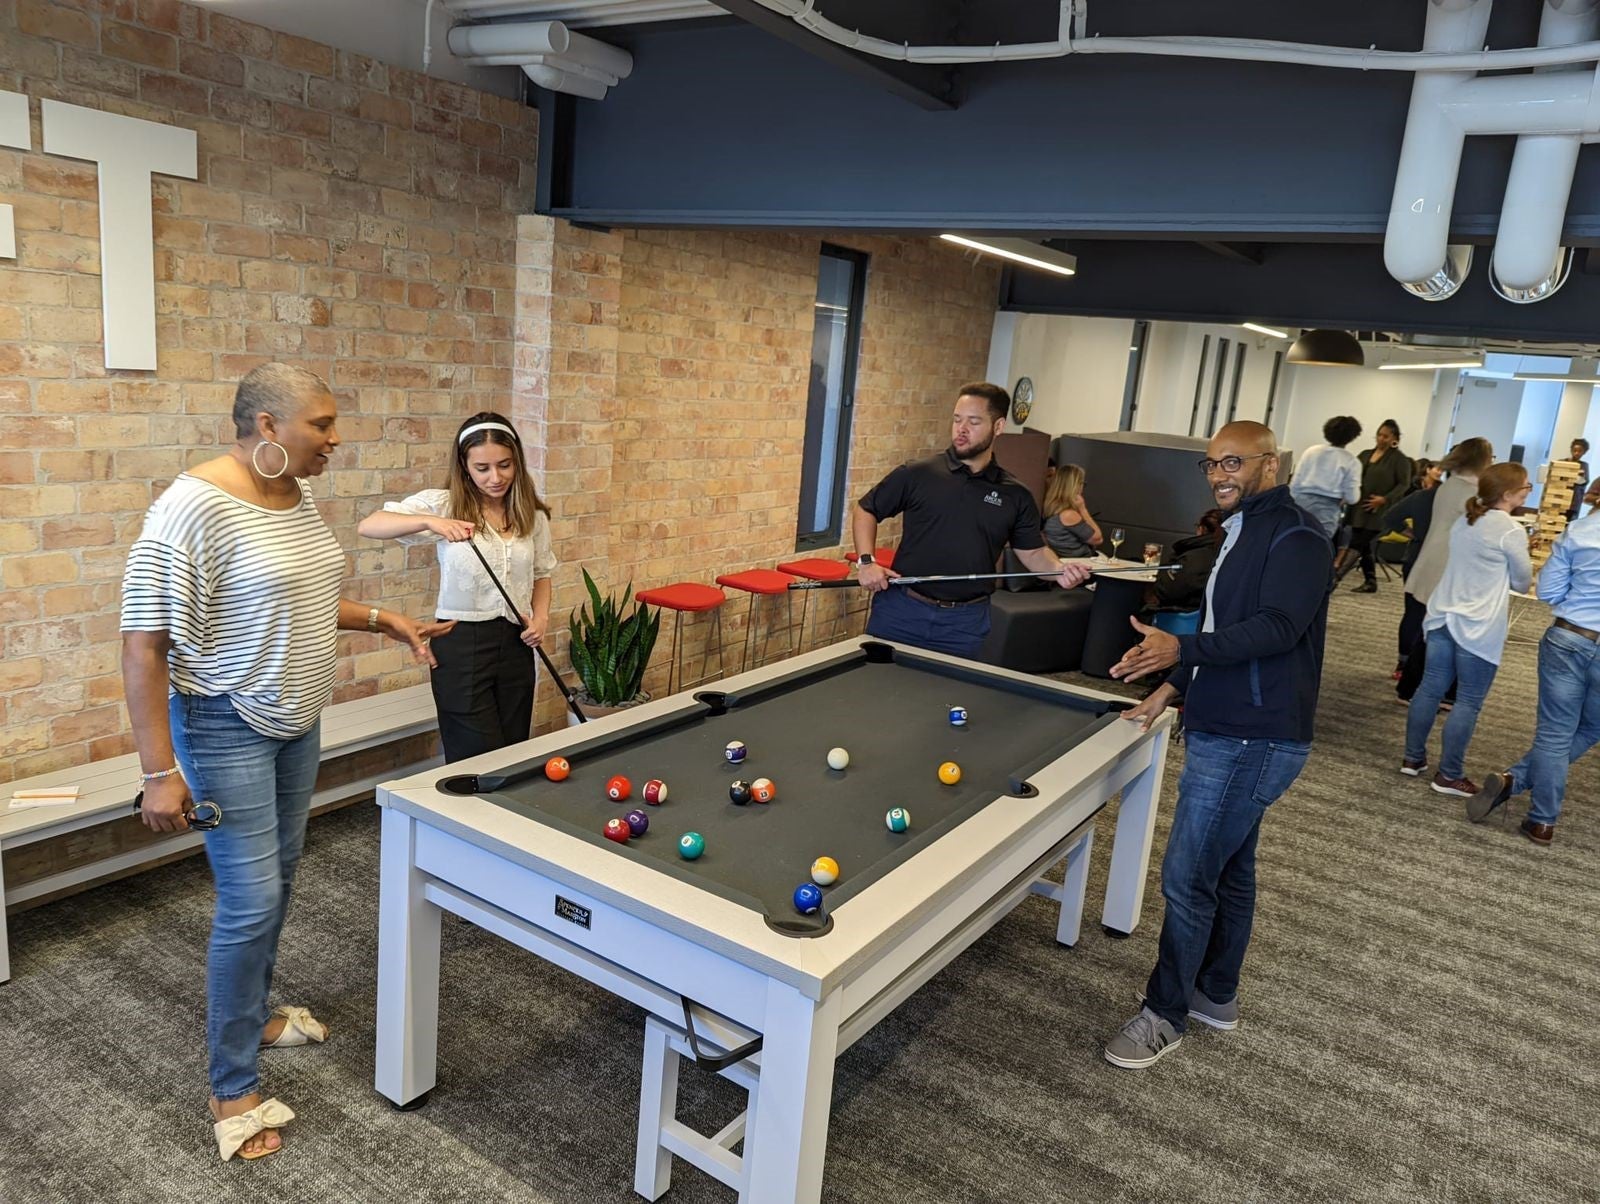 Argus co-op students and employees playing pool at the office